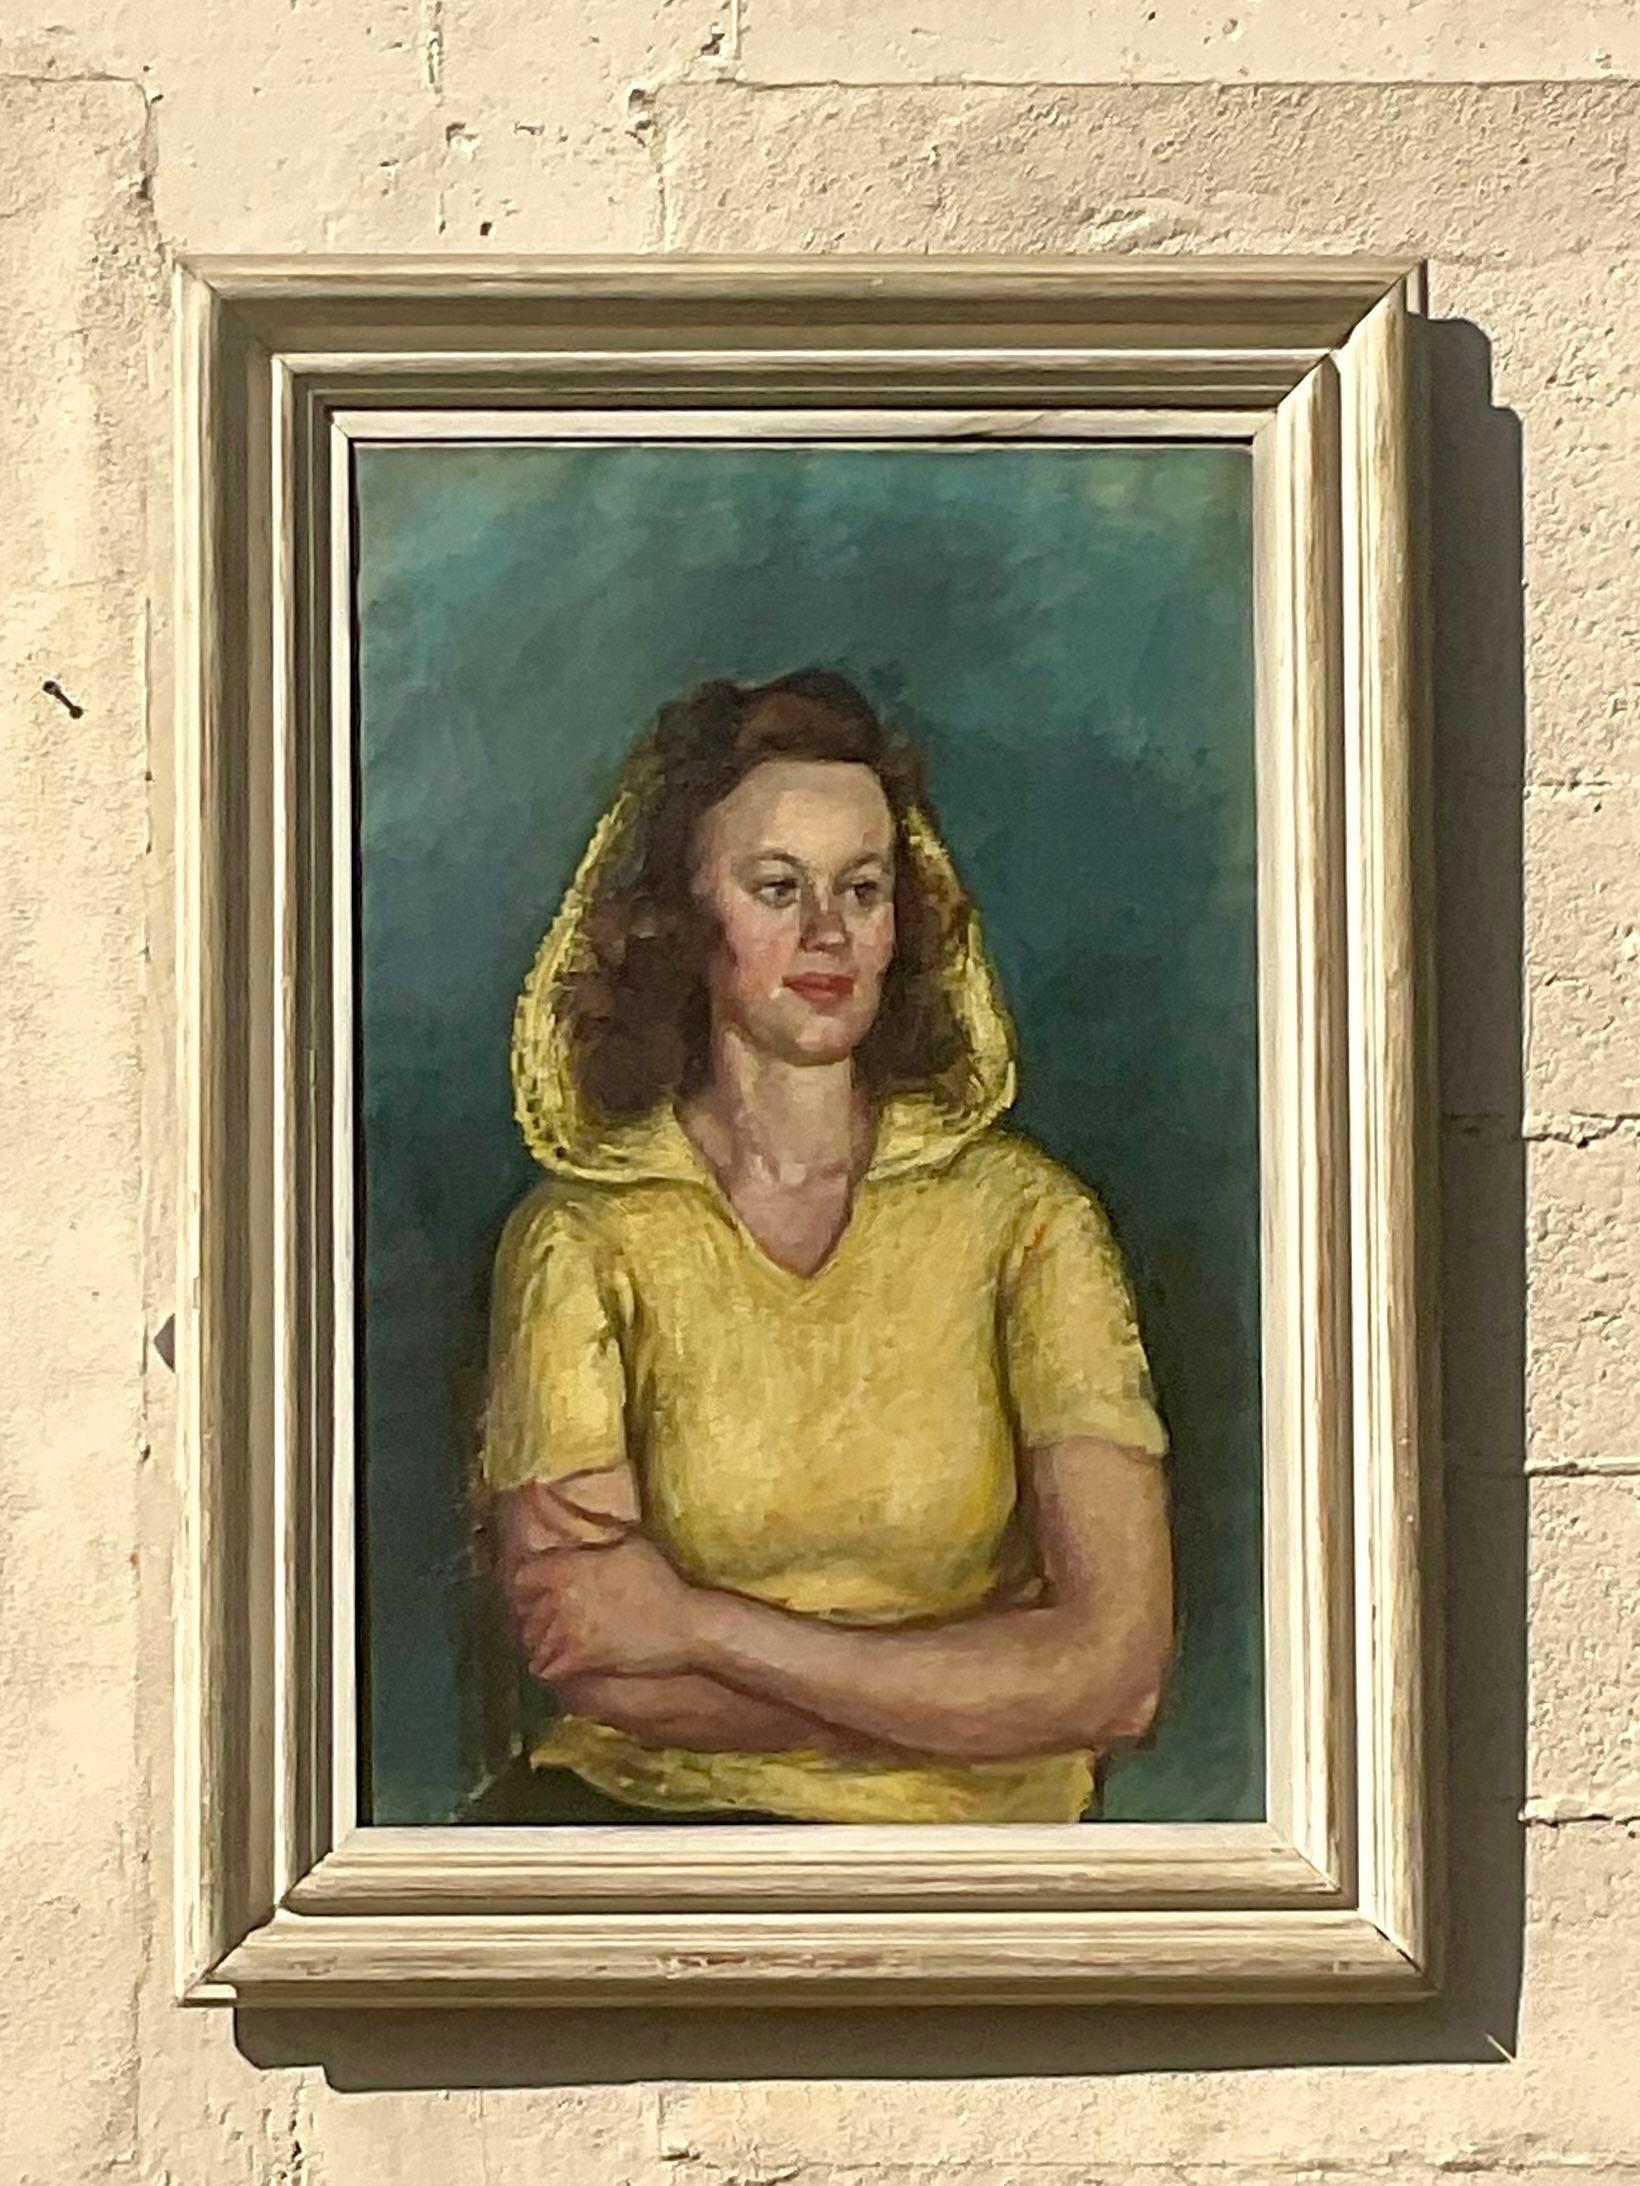 A stunning vintage MCM original oil portrait. A chic composition of a woman in a yellow hood. Done by the artist Simkavitch. Acquired from a Palm Beach estate.